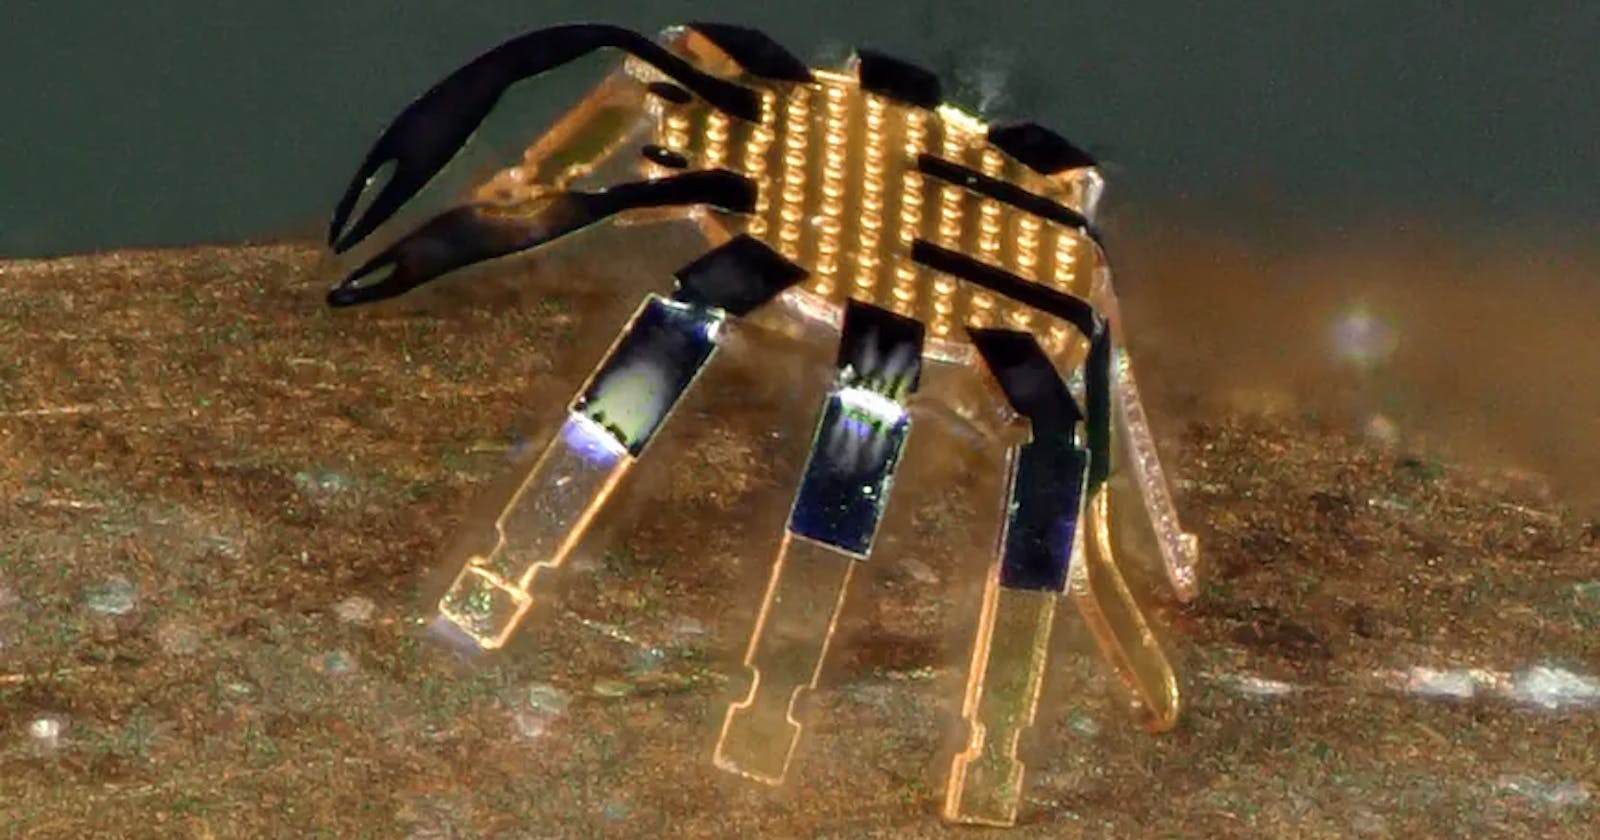 Tiny Robot Crab Army Could Assist With Surgeries One Day